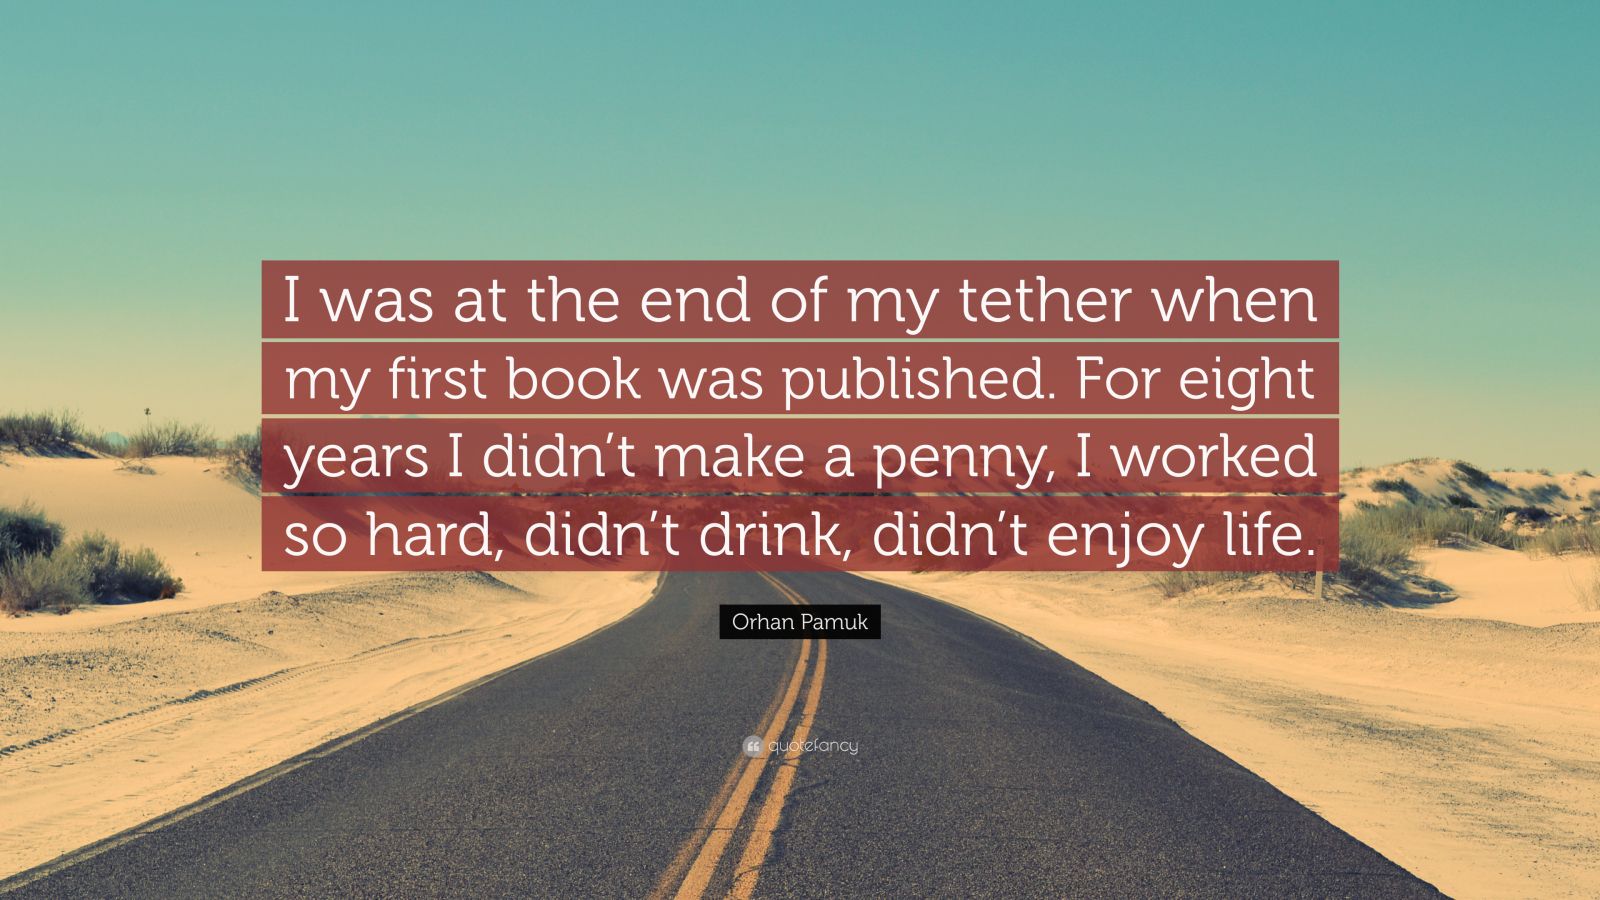 Orhan Pamuk Quote: “I was at the end of my tether when my first book ...